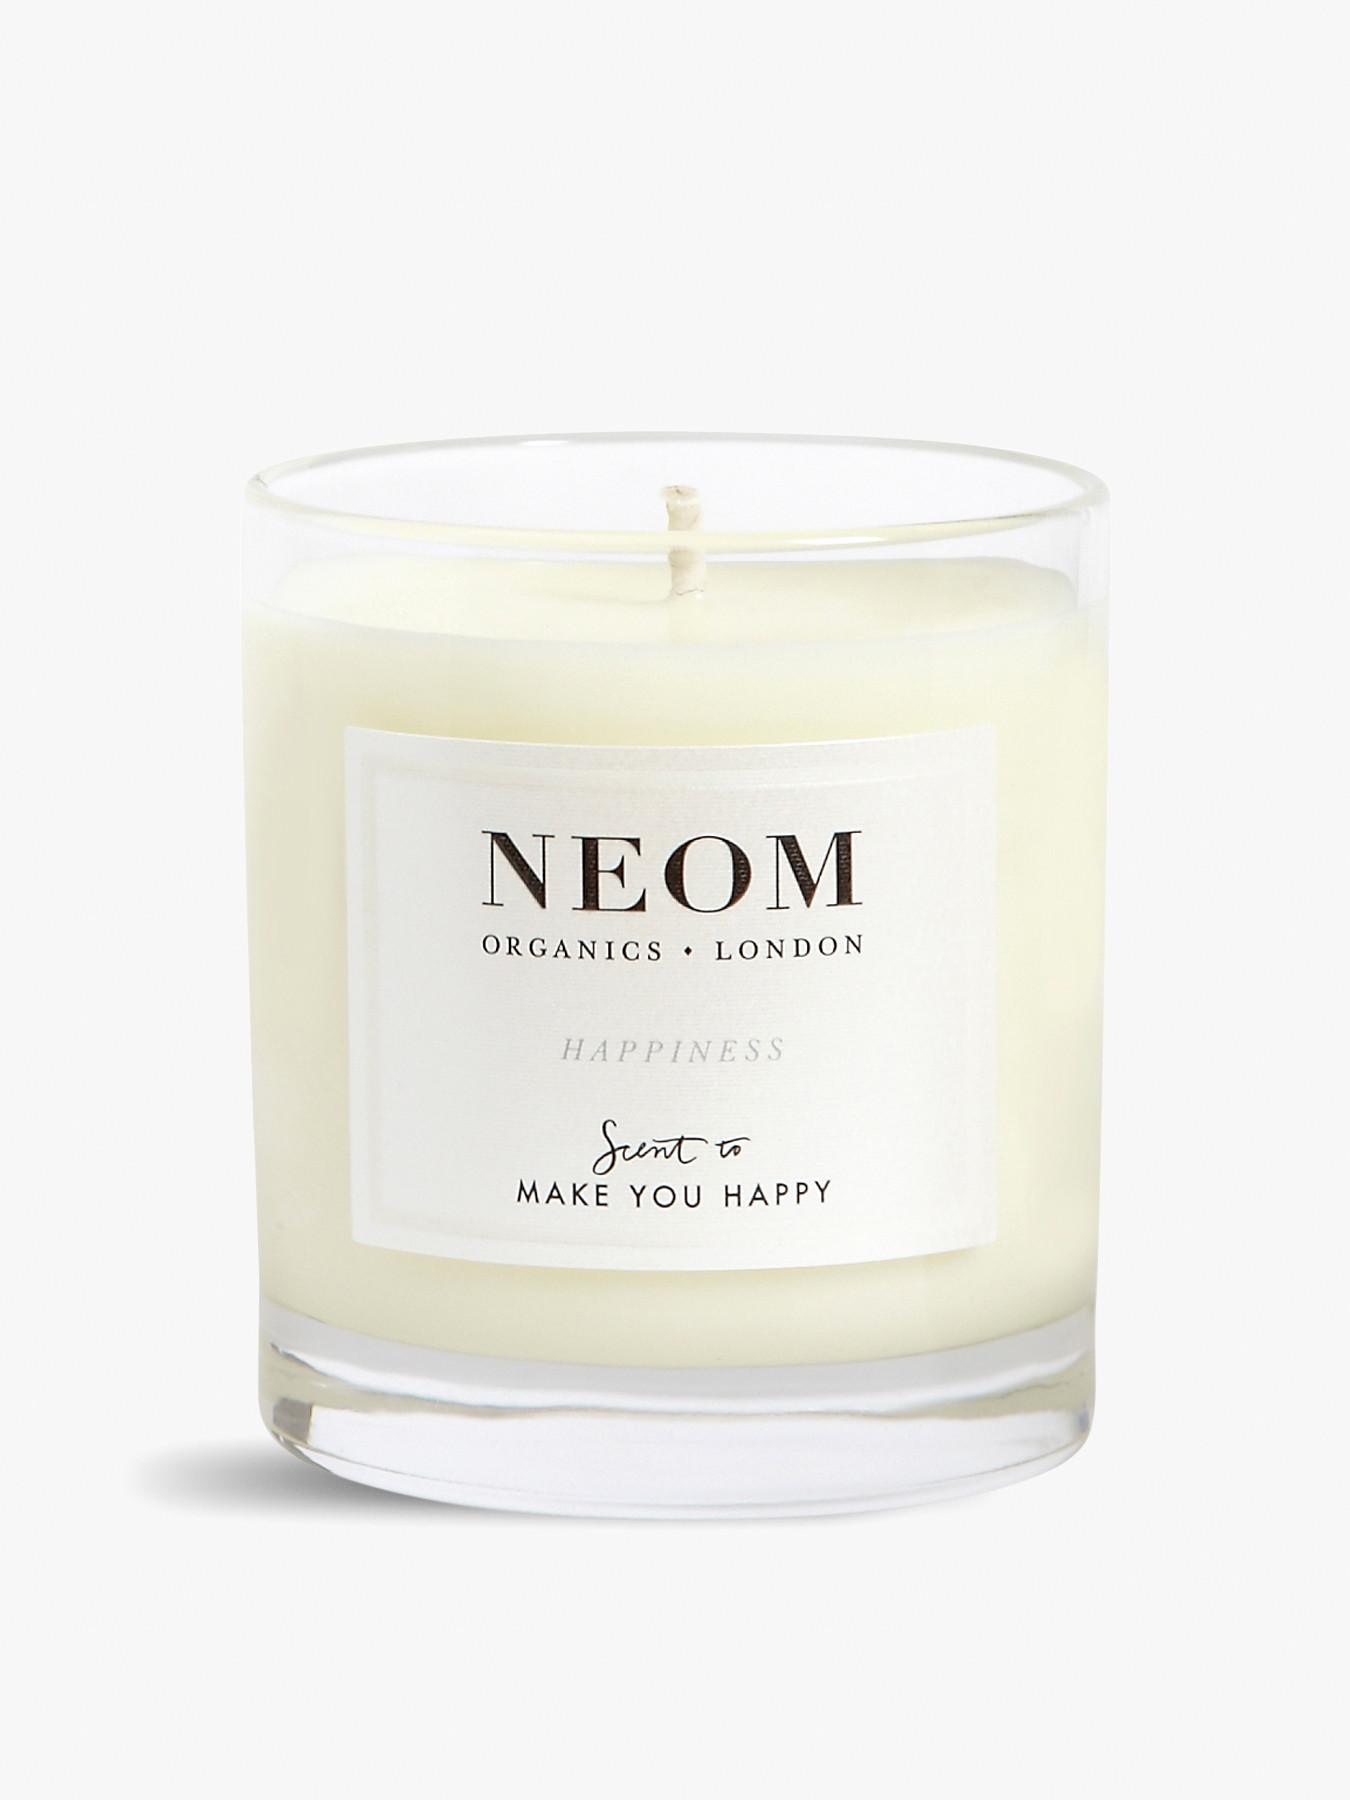 NEOM Happiness 1 Wick Scented Candle | Fenwick